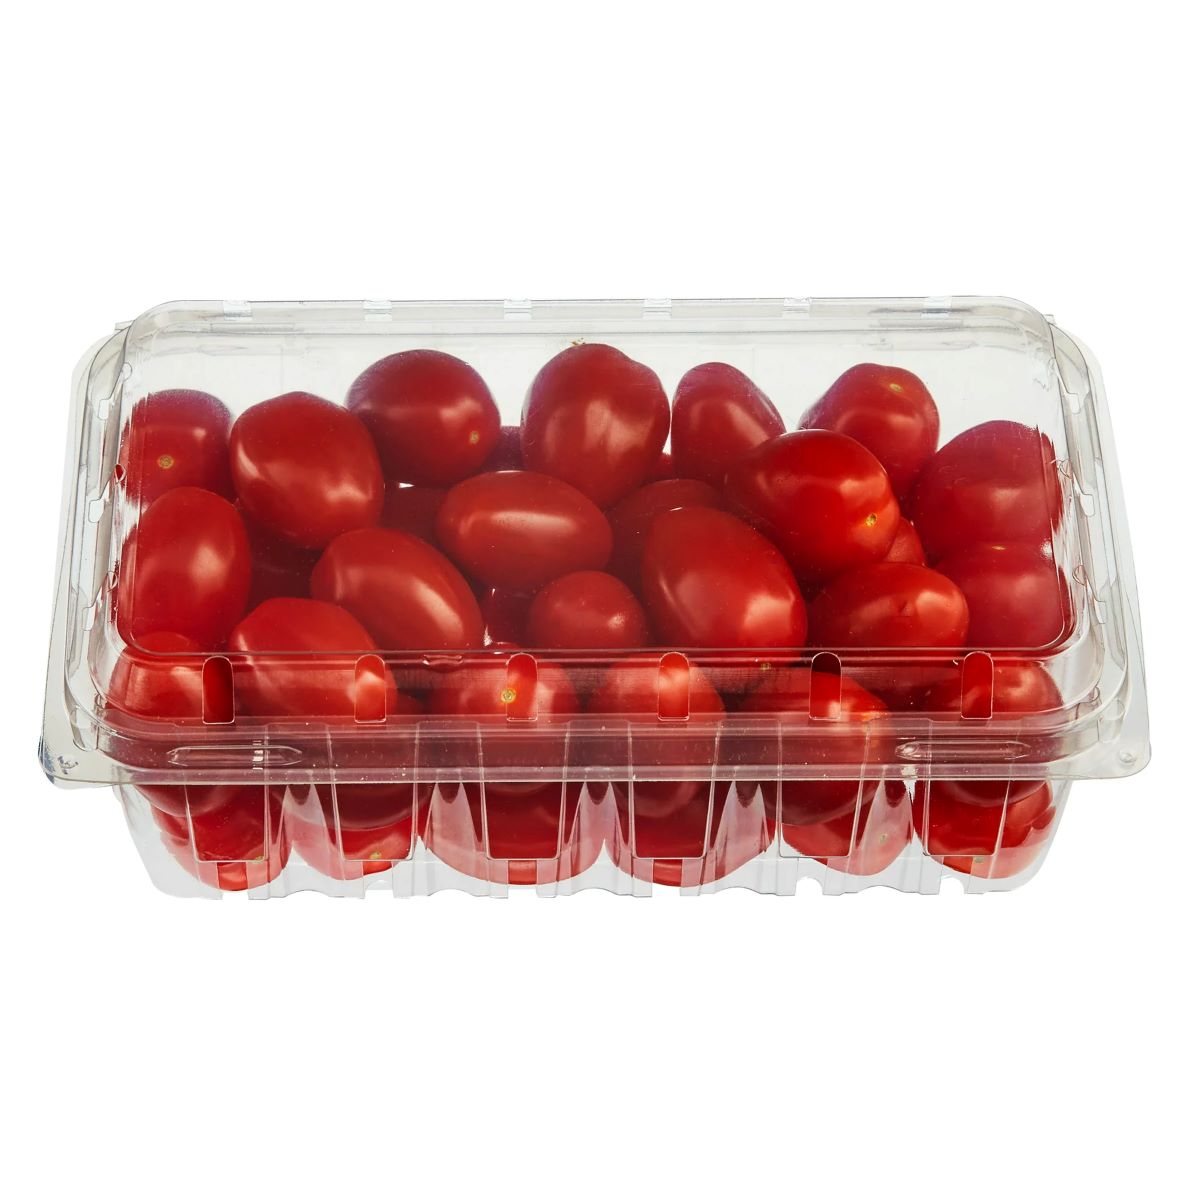 How To Store Grape Tomatoes